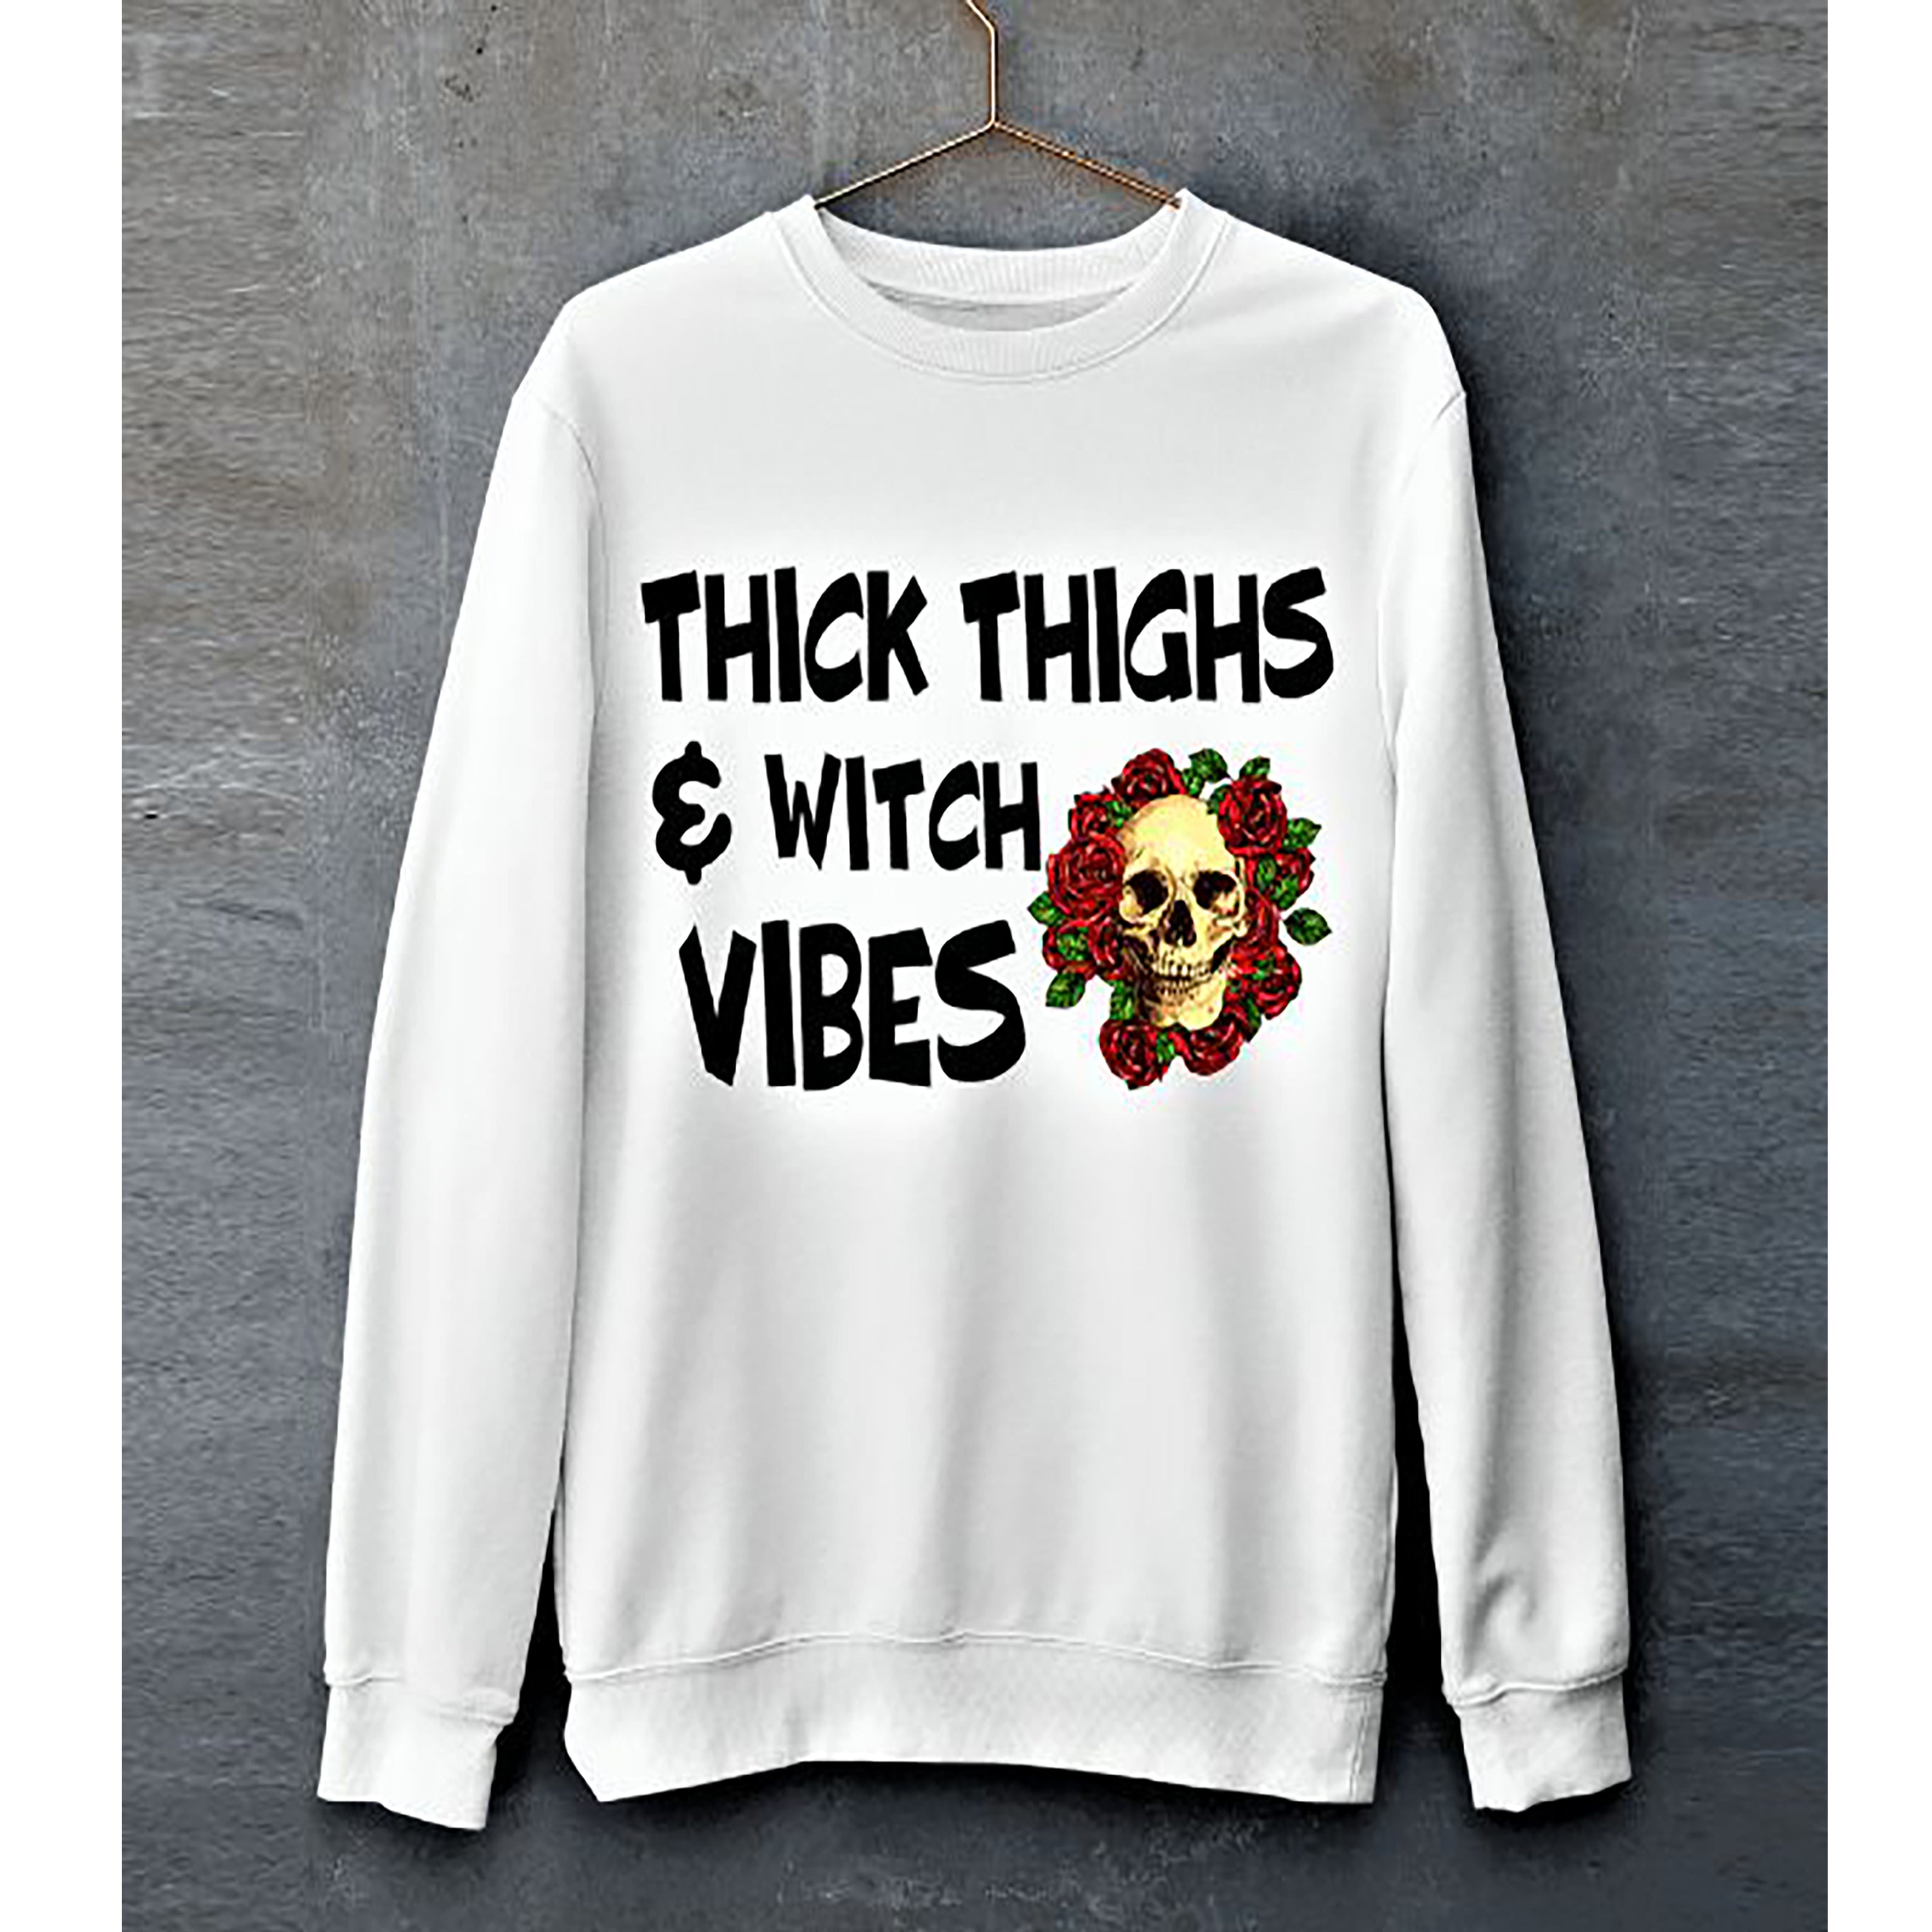 "THICK THIGHS AND WITCH VIBES"- Hoodie & Sweatshirt.